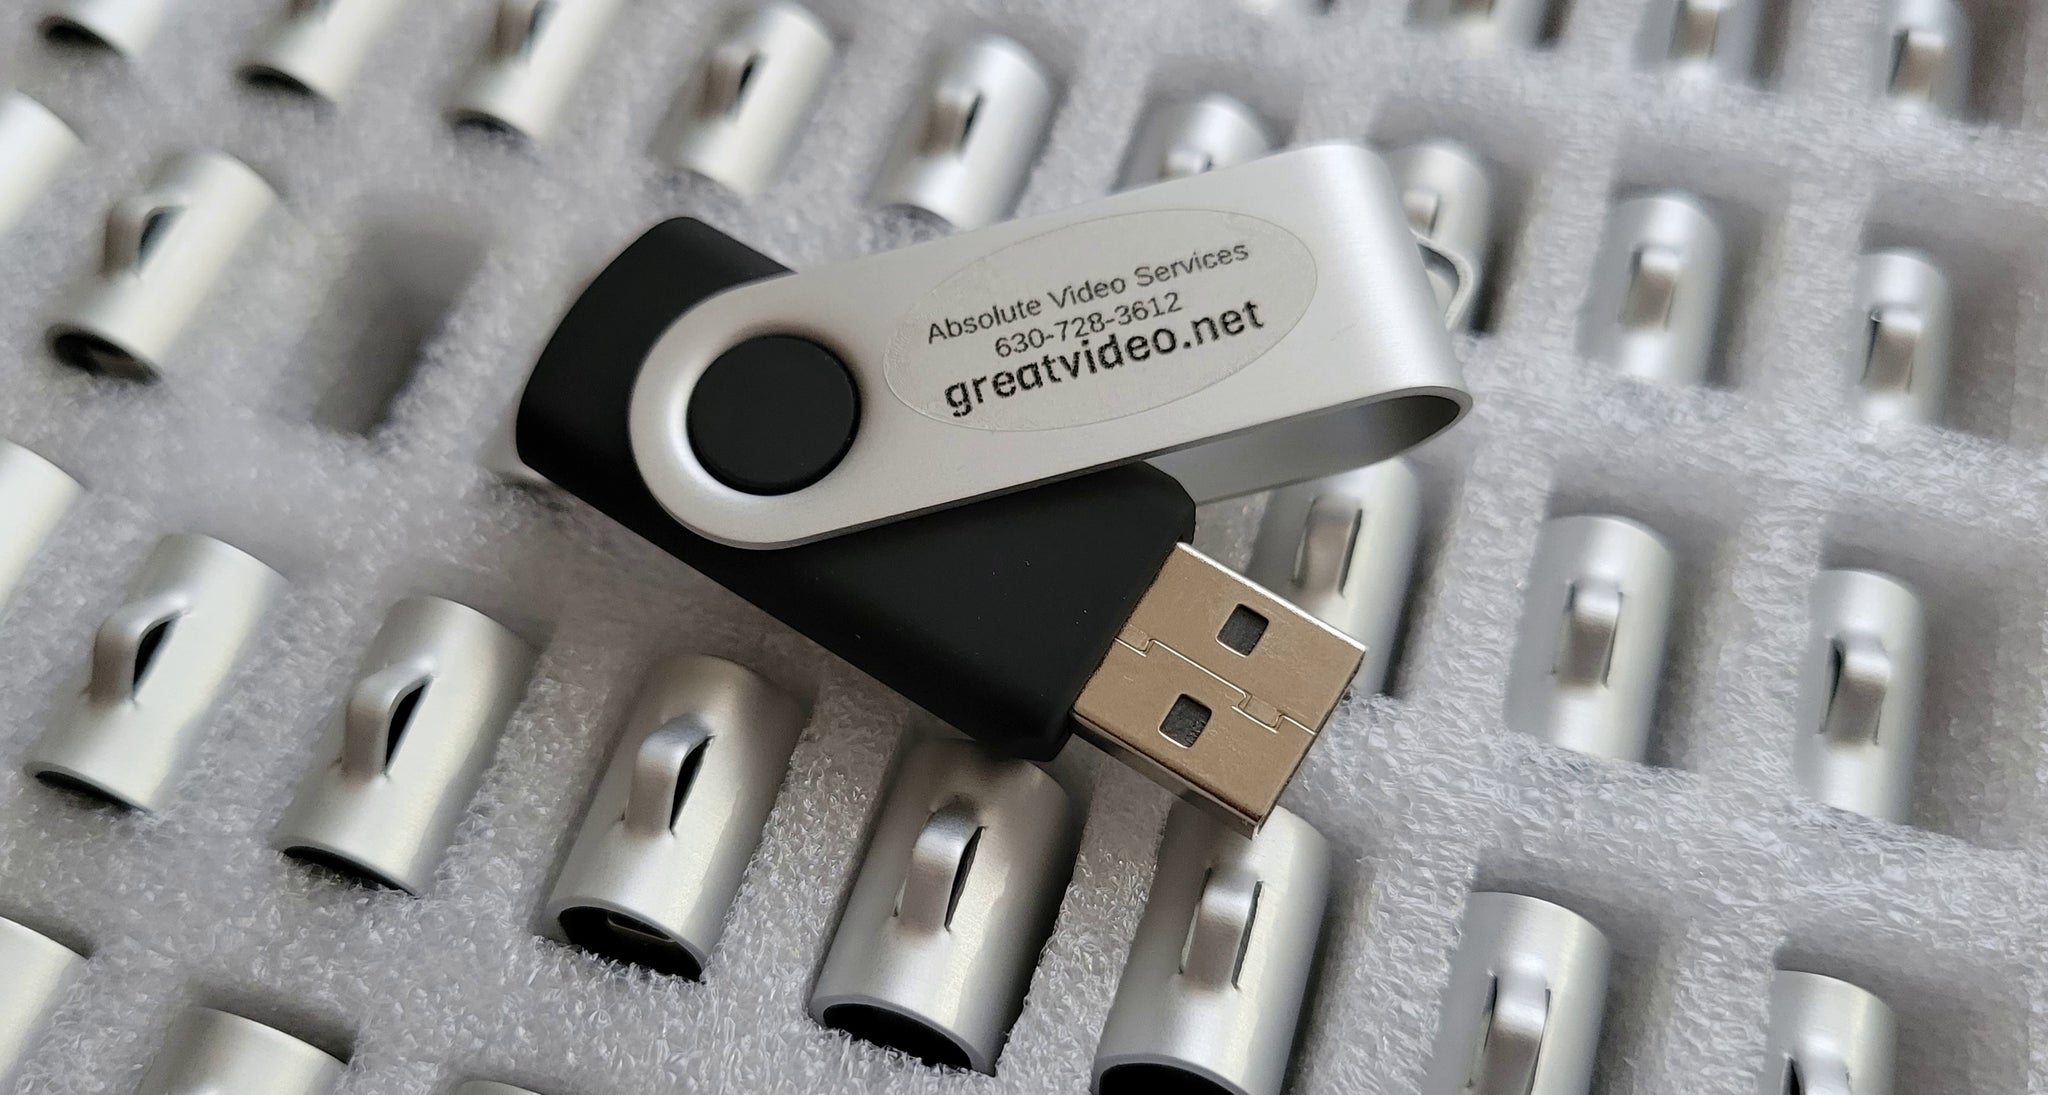 USB Flash Drive for Audio -  Video - Film - Photo - Transfer Services - Absolute Video Services Batavia